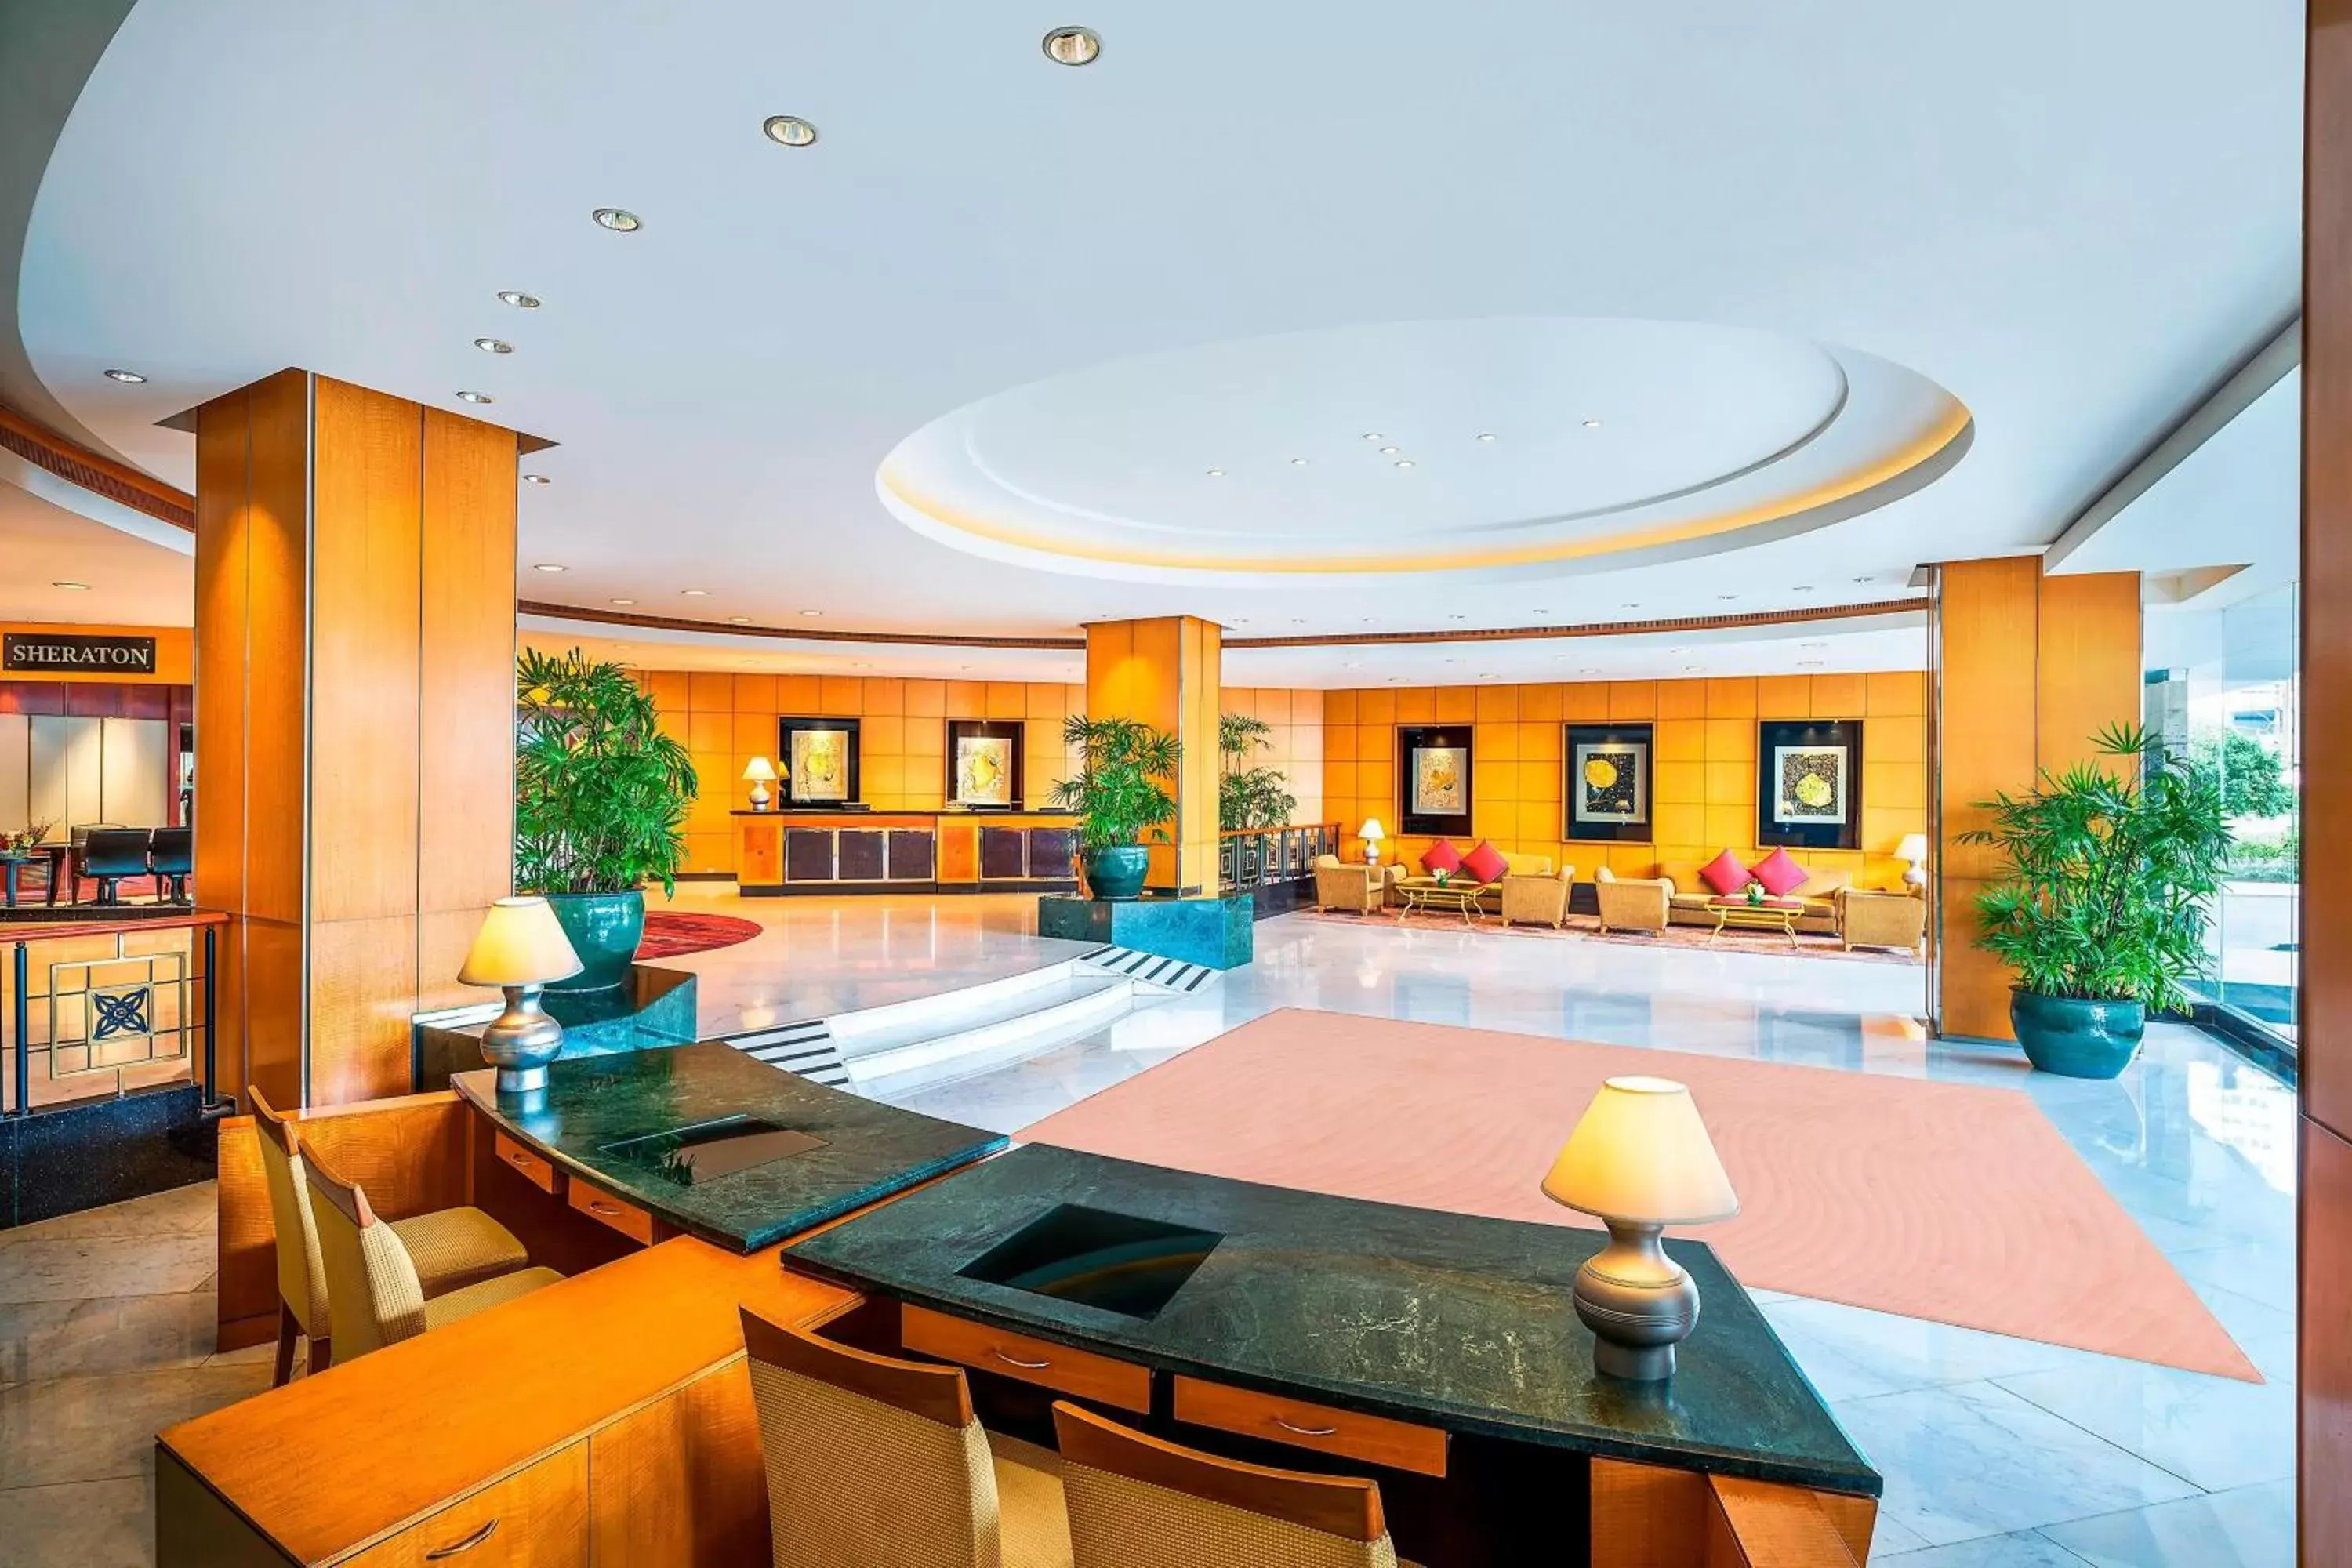 Lobby or reception in Royal Orchid Sheraton Hotel and Towers